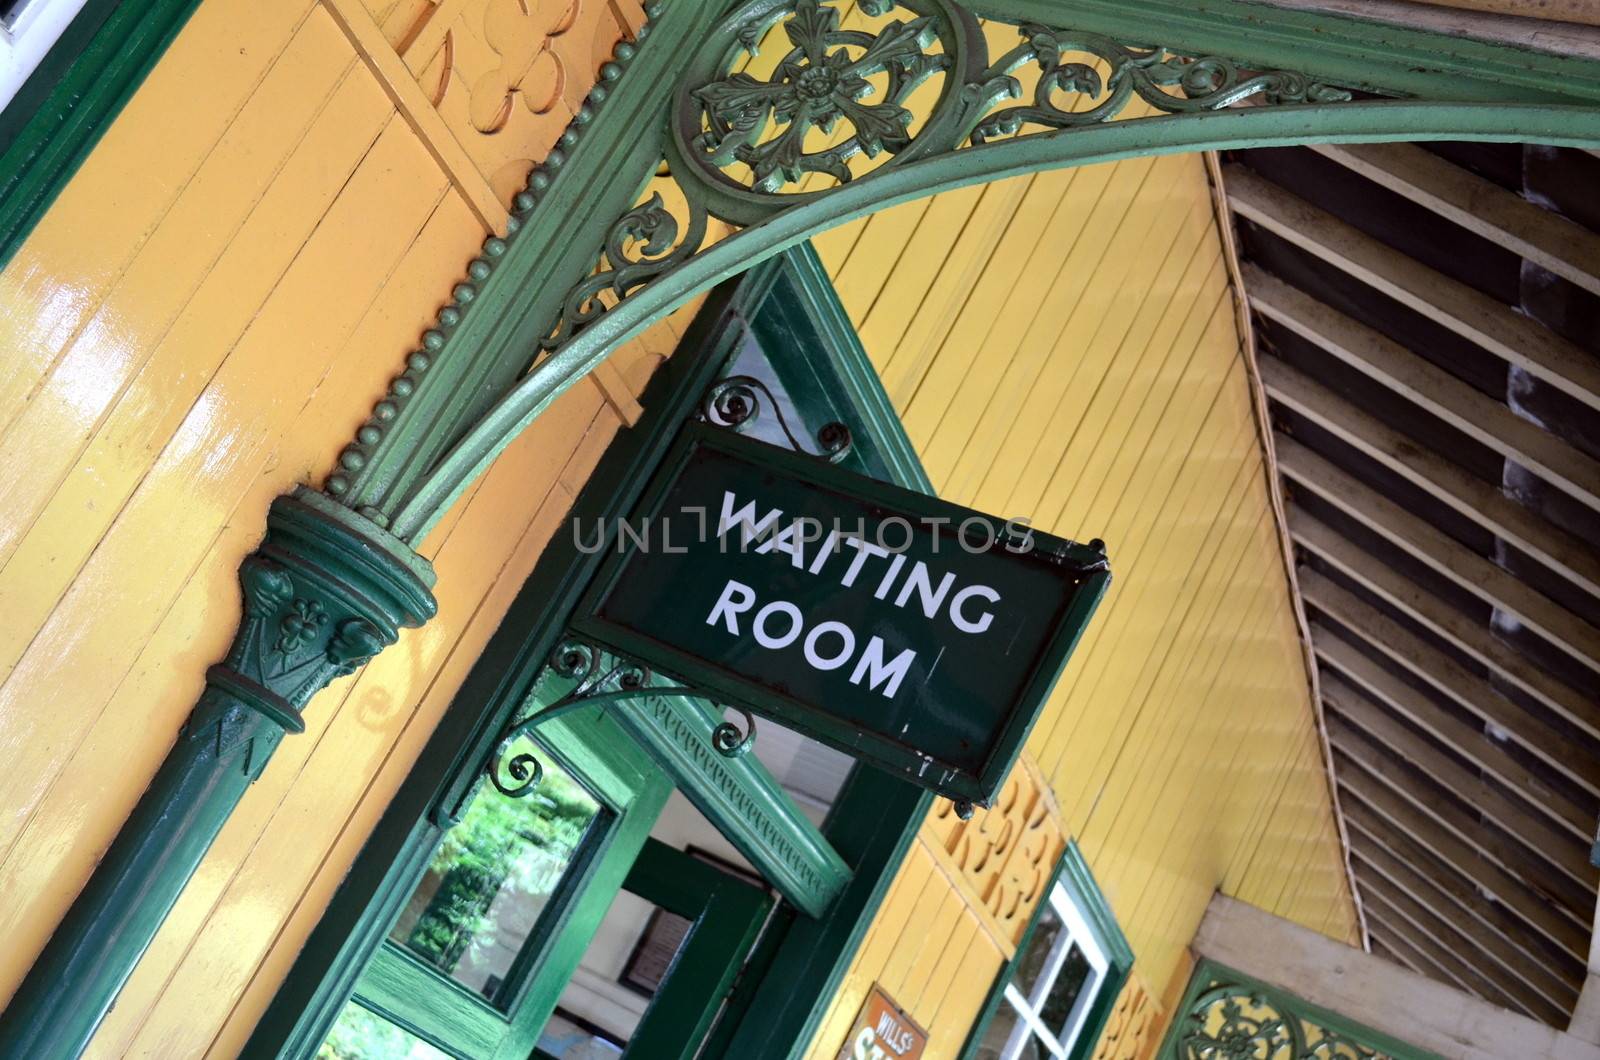 Waiting room sign on Victorian railway station platform by bunsview